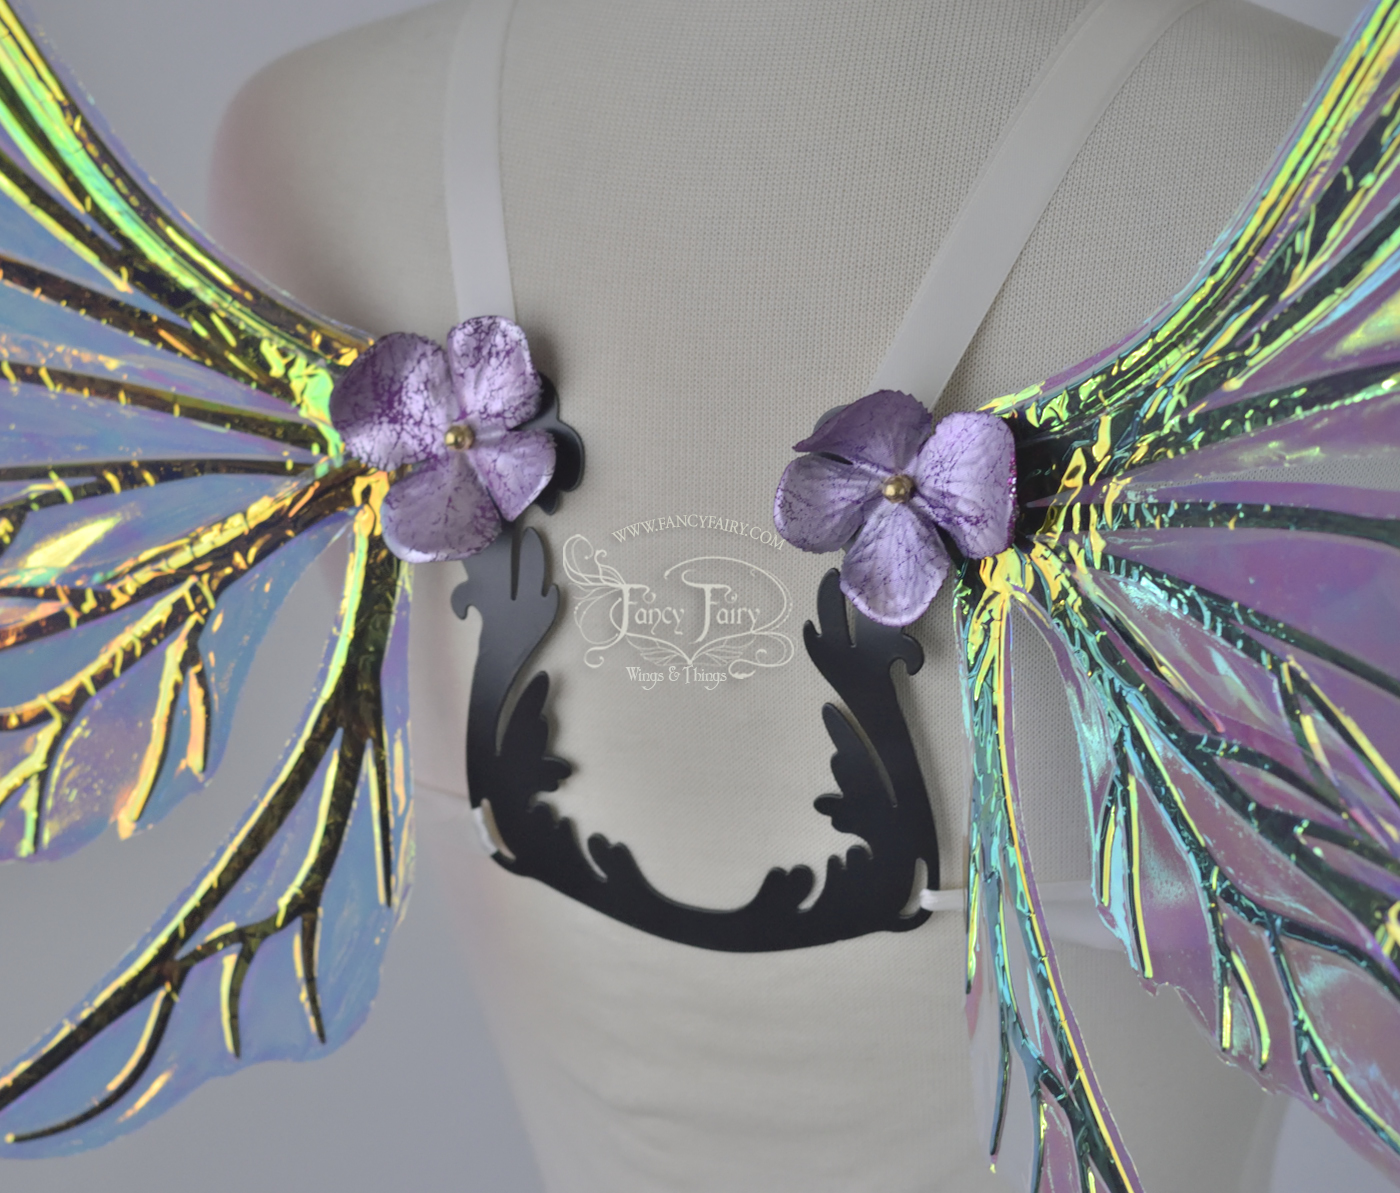 Colette Convertible Iridescent "Pix" Fairy Wings in Dark Crystal with Silver veins